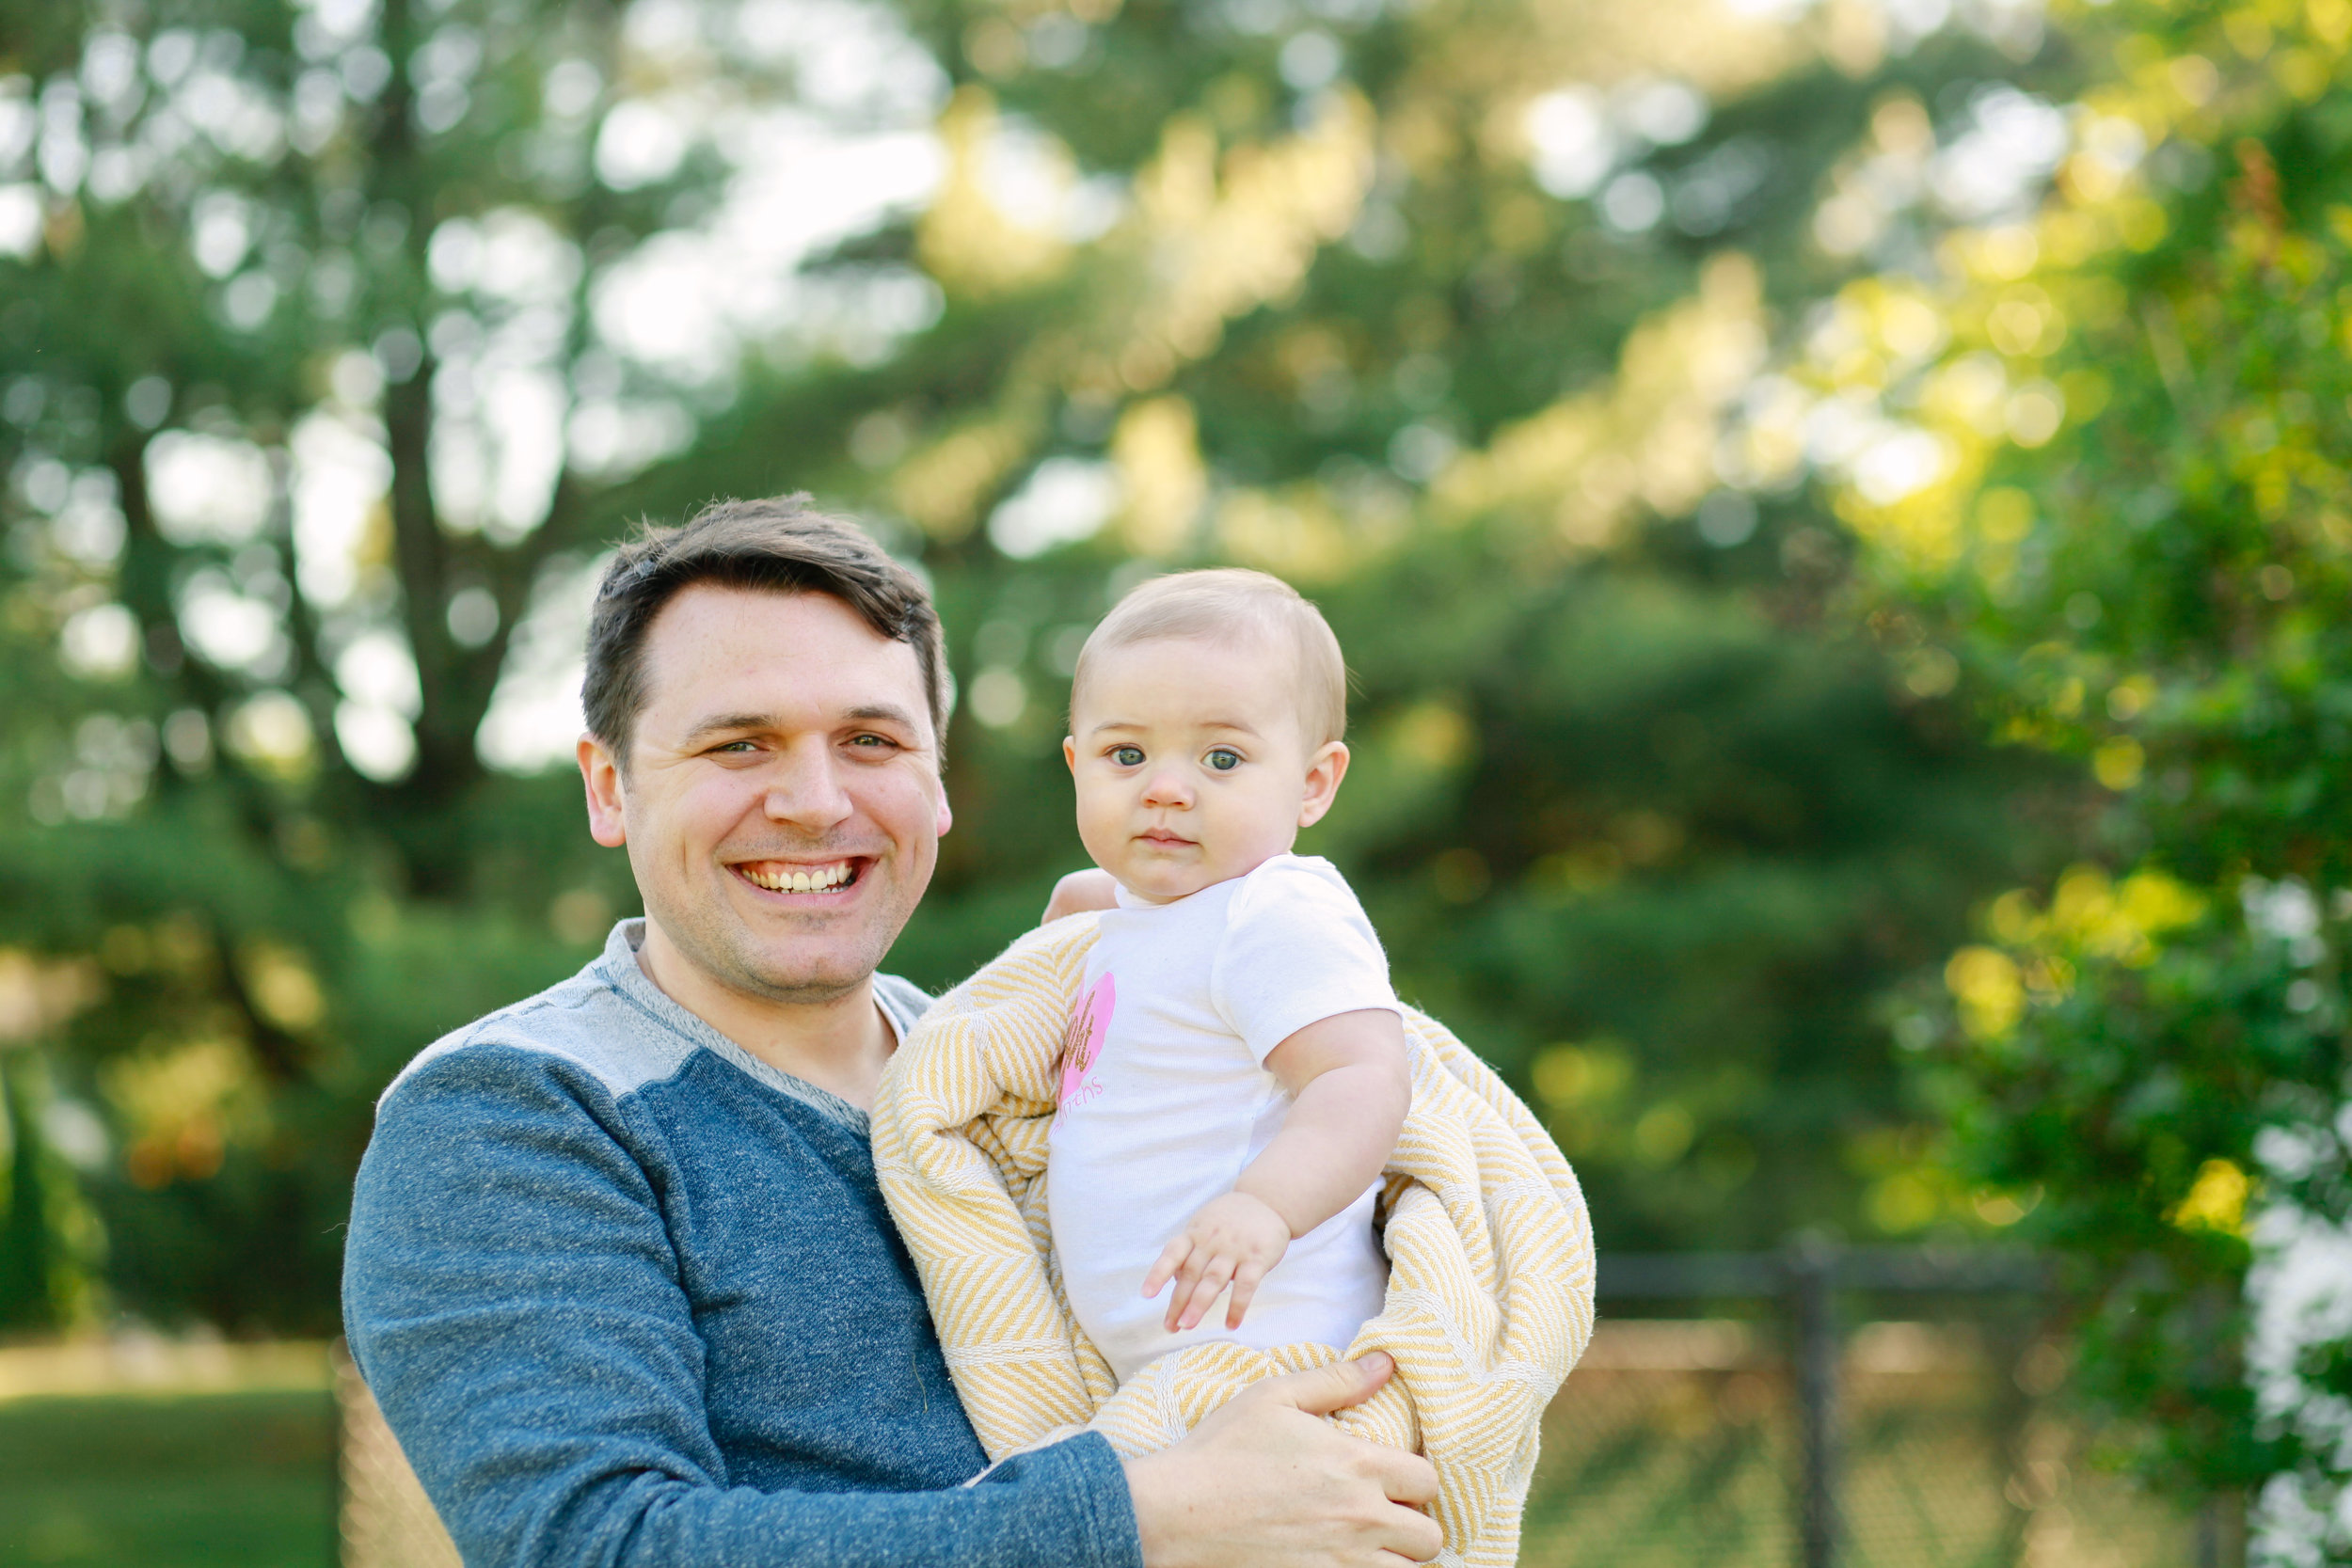 Daddy Daughter Photo Shoot | MALLORIE OWENS